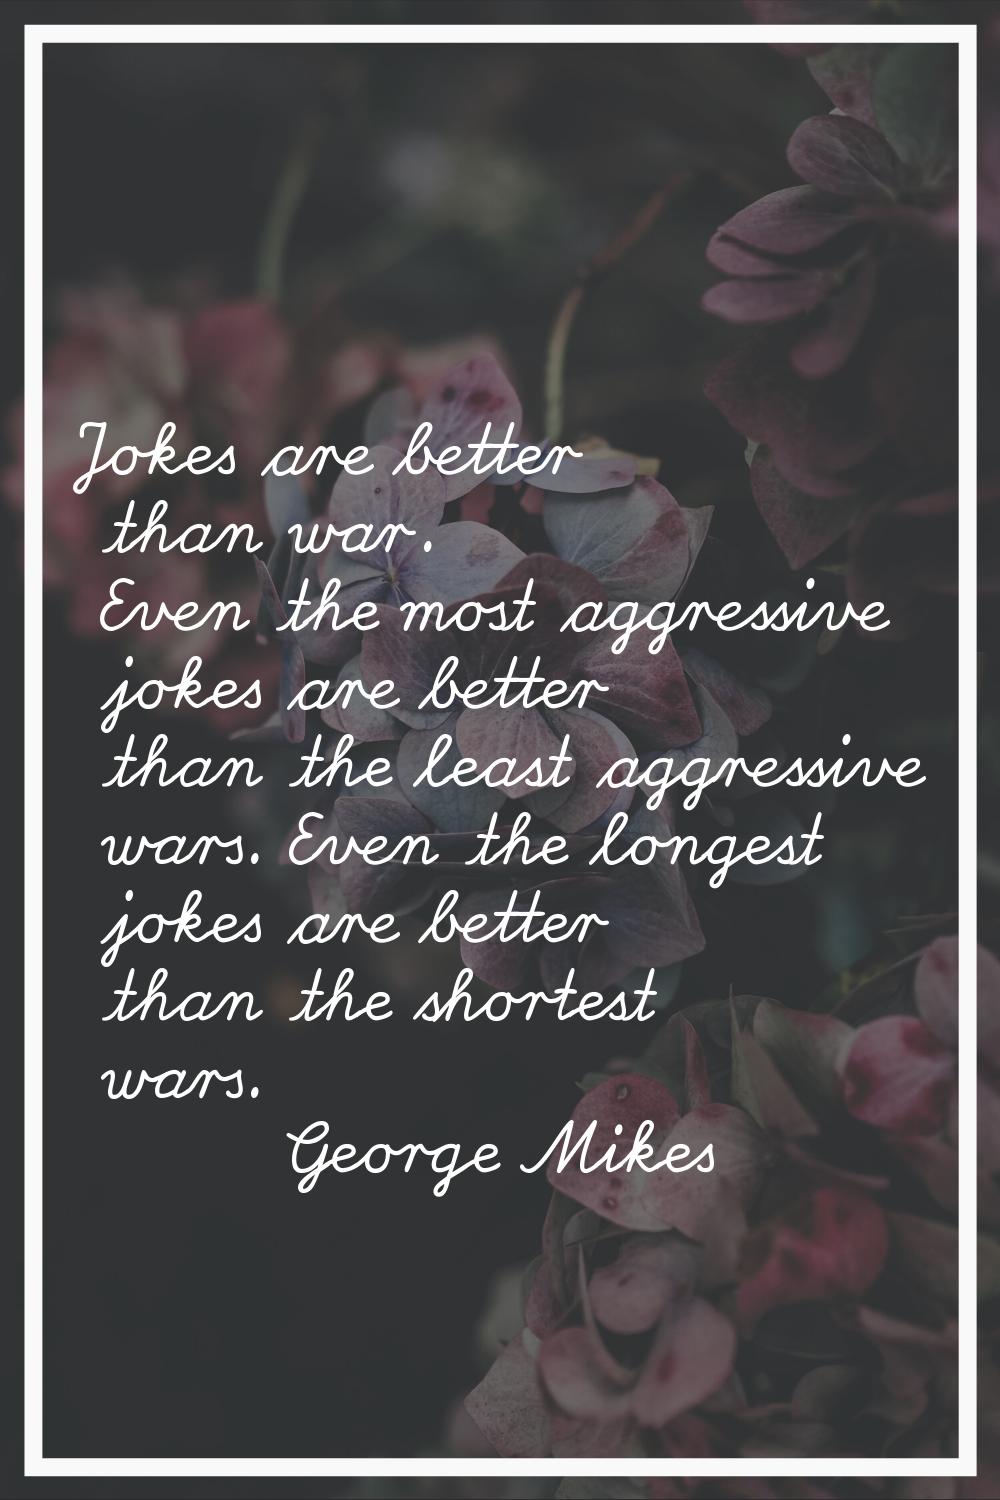 Jokes are better than war. Even the most aggressive jokes are better than the least aggressive wars